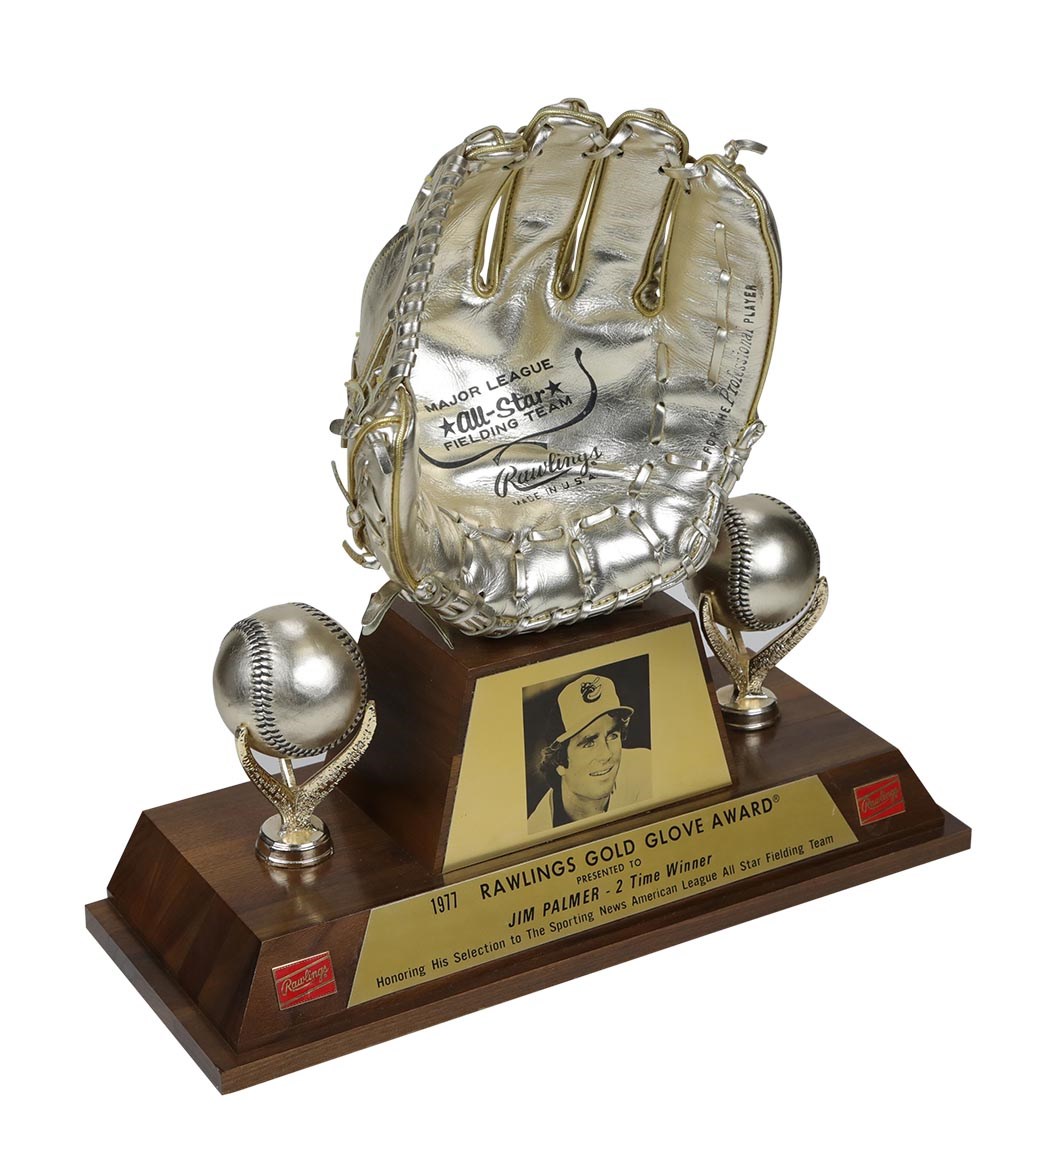 Hayes wins second straight Rawlings Gold Glove Award